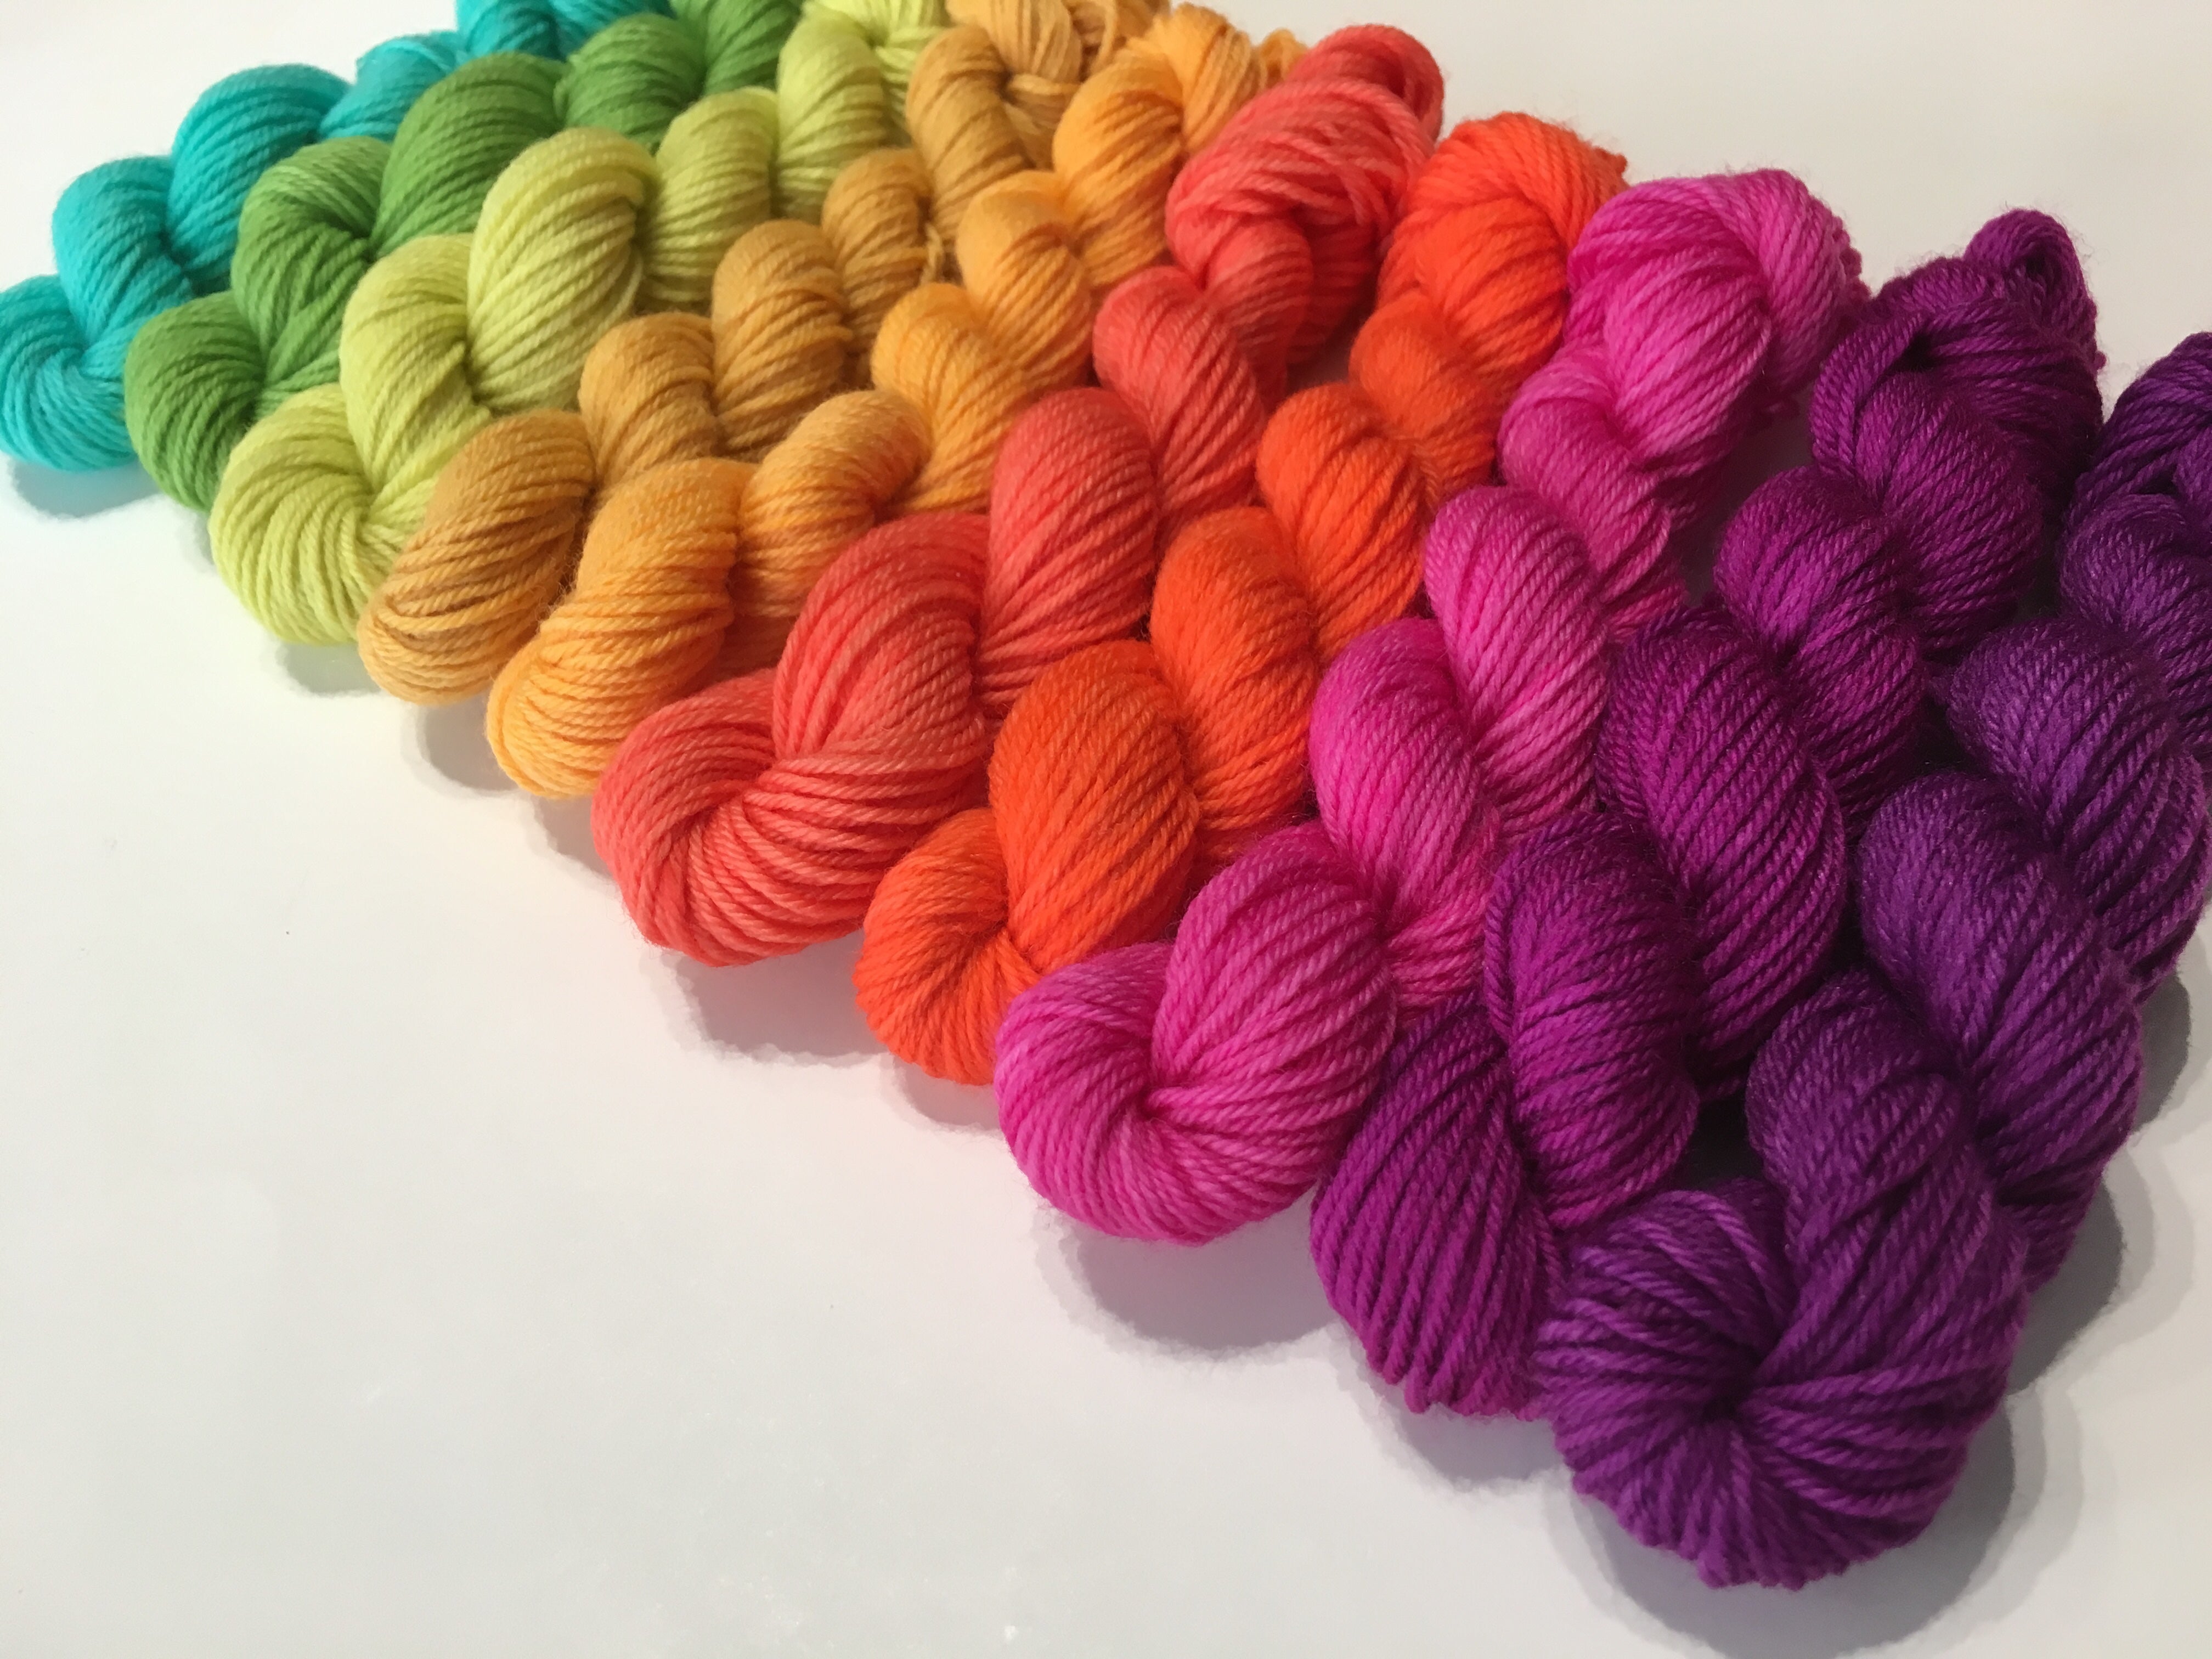 ten 10g sock weight miniskeins in solid rainbow colours